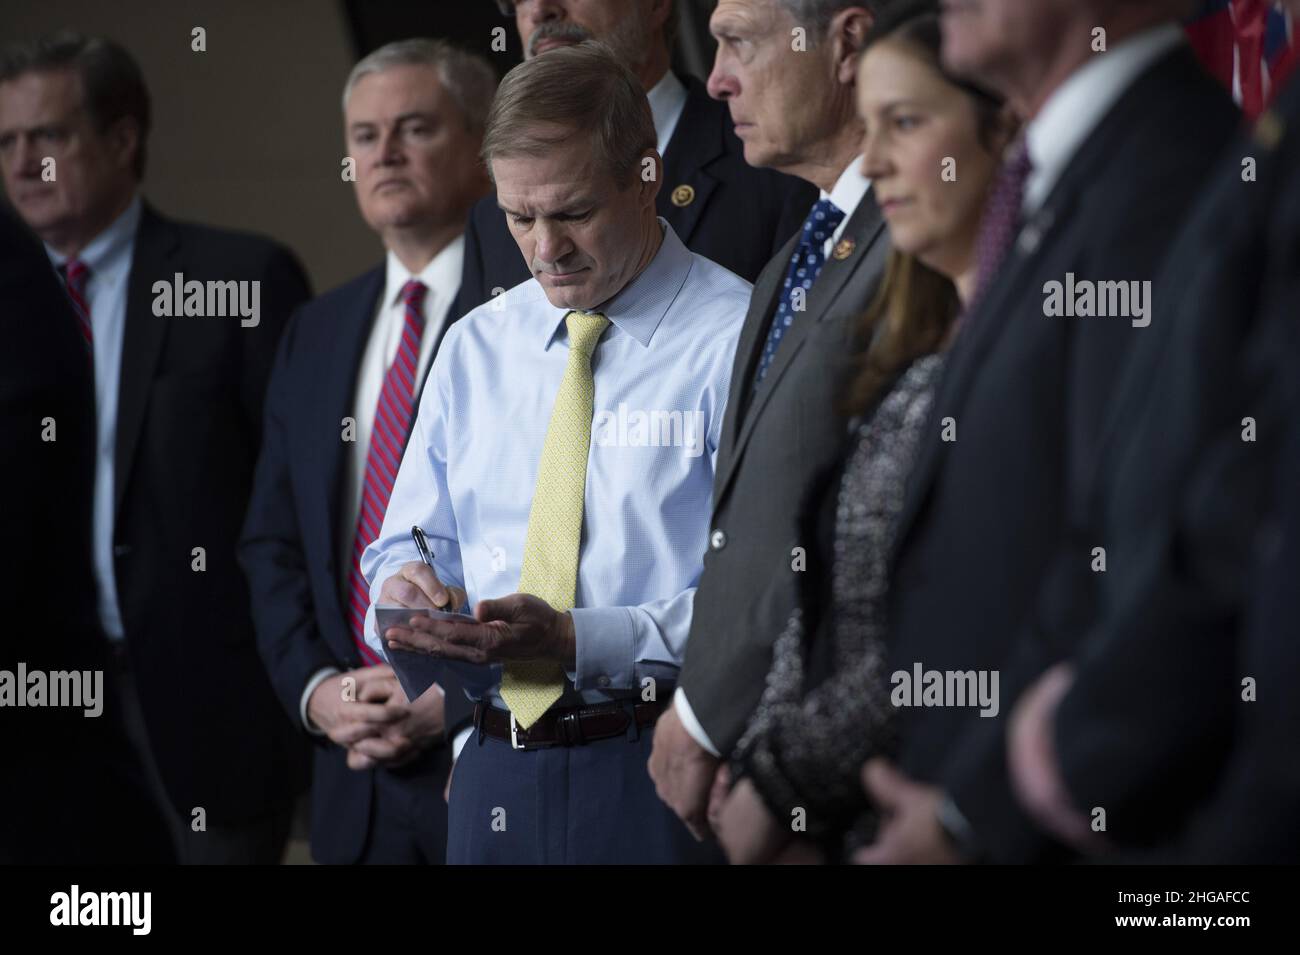 Washington, United States. 19th Jan, 2022. Rep. Jim Jordan, R-OH, takes notes as House Minority Whip Steve Scalise, R-LA, speaks during a press conference after a House Republican Caucus meeting at the US Capitol in Washington, DC on Wednesday, January 19, 2022. Photo by Bonnie Cash/UPI Credit: UPI/Alamy Live News Stock Photo